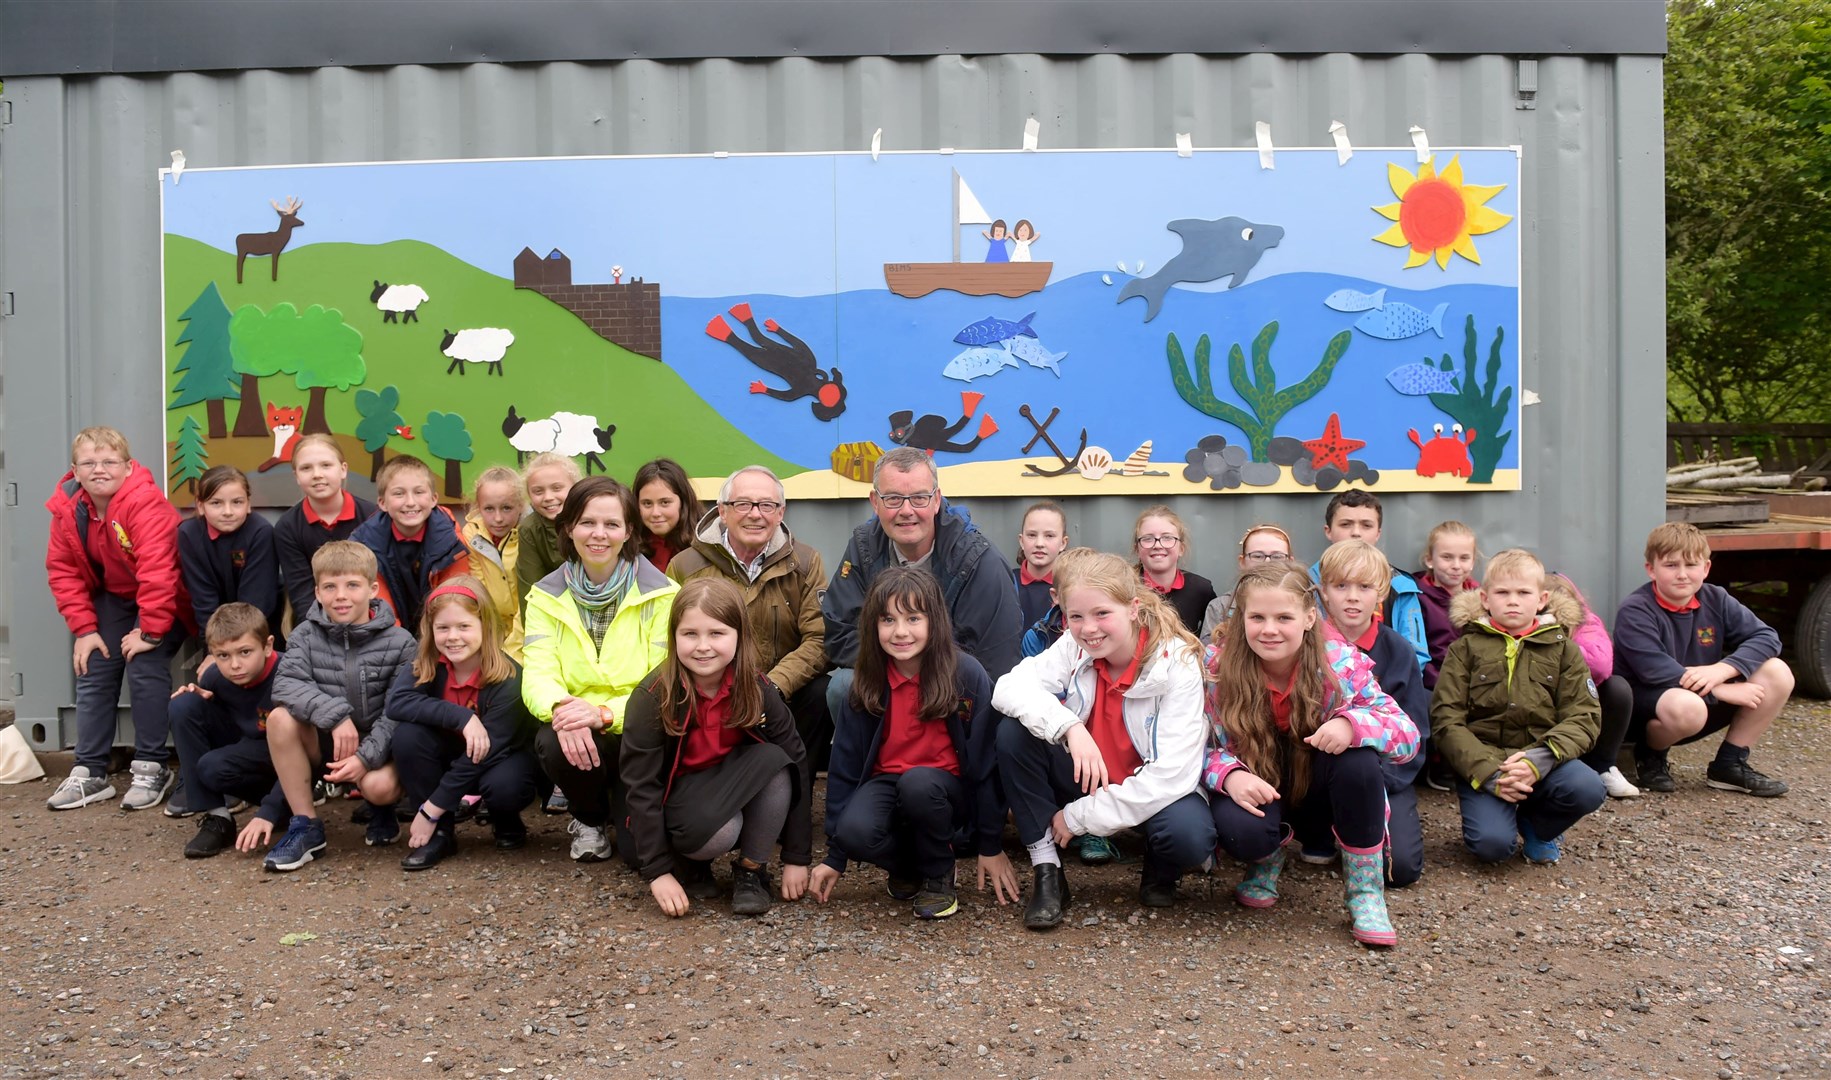 Avoch Primary kids pictured long before the Covid-19 crisis at the unveiling of the mural back in 2019. Picture: Callum Mackay